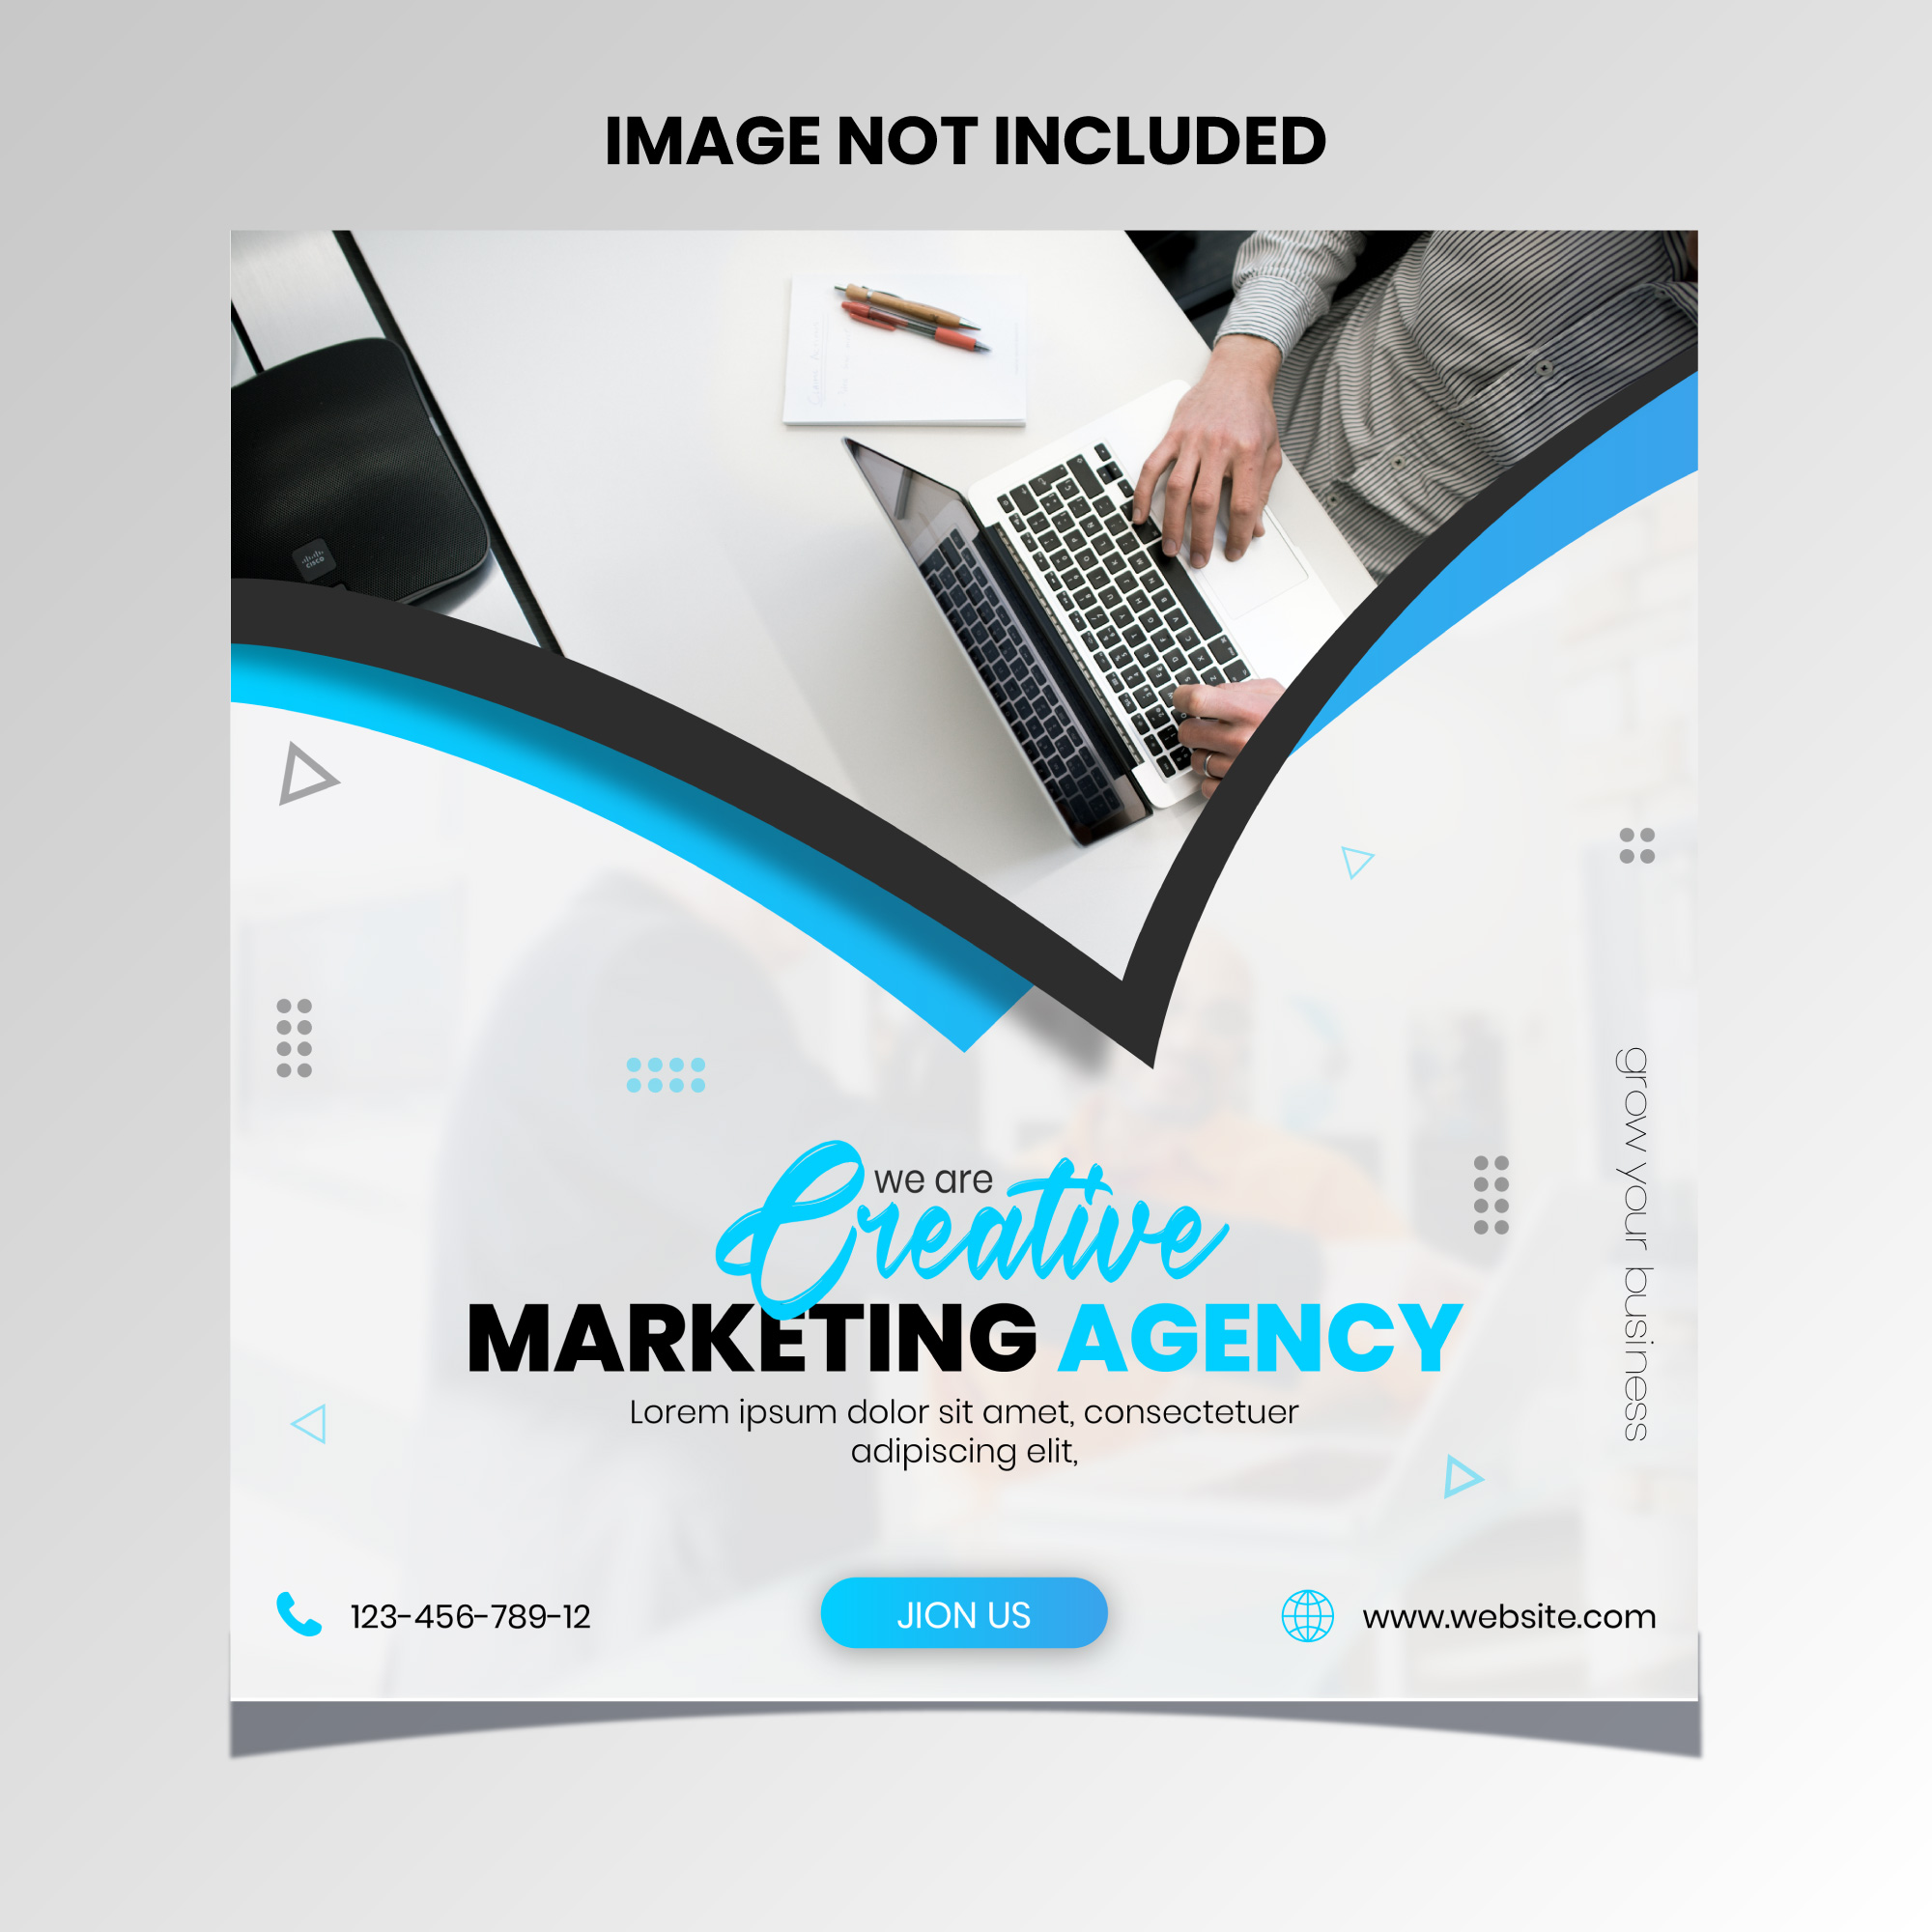 Creative, Minimal, and Modern Marketing Agency Social media Post Template cover image.